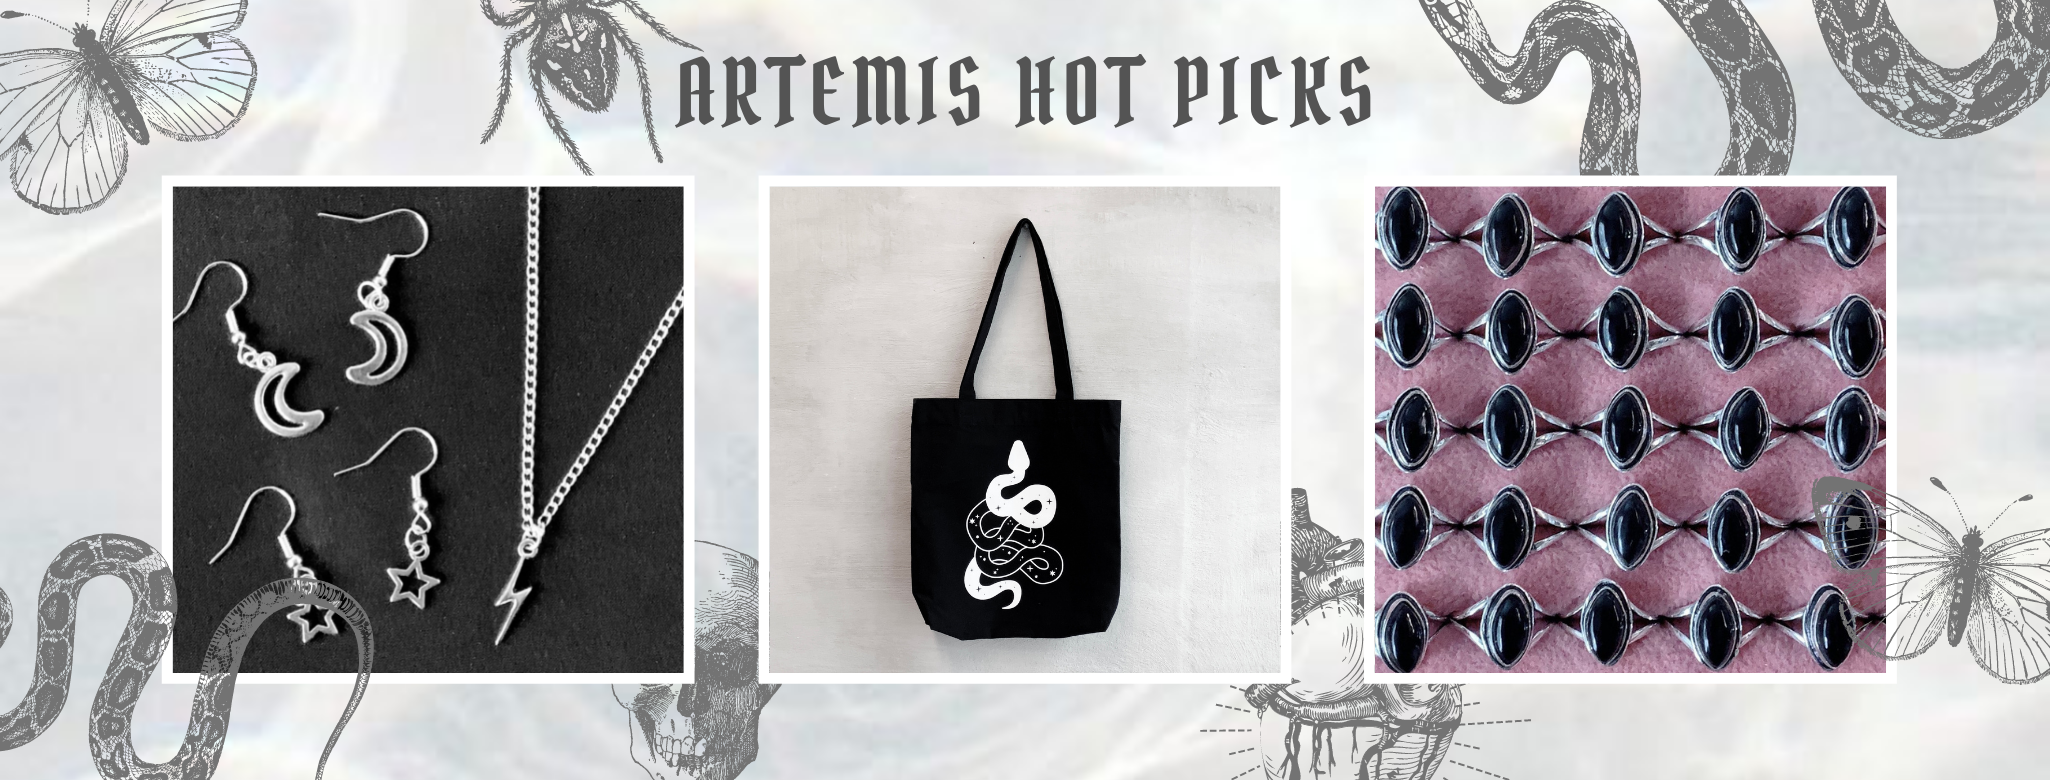 artemis accessories hot picks best selling products serpent tote bag handmade silver plated dainty jewellery pretty cute fashion alt grunge gothic boho bohemian Manchester instagram gifts for her